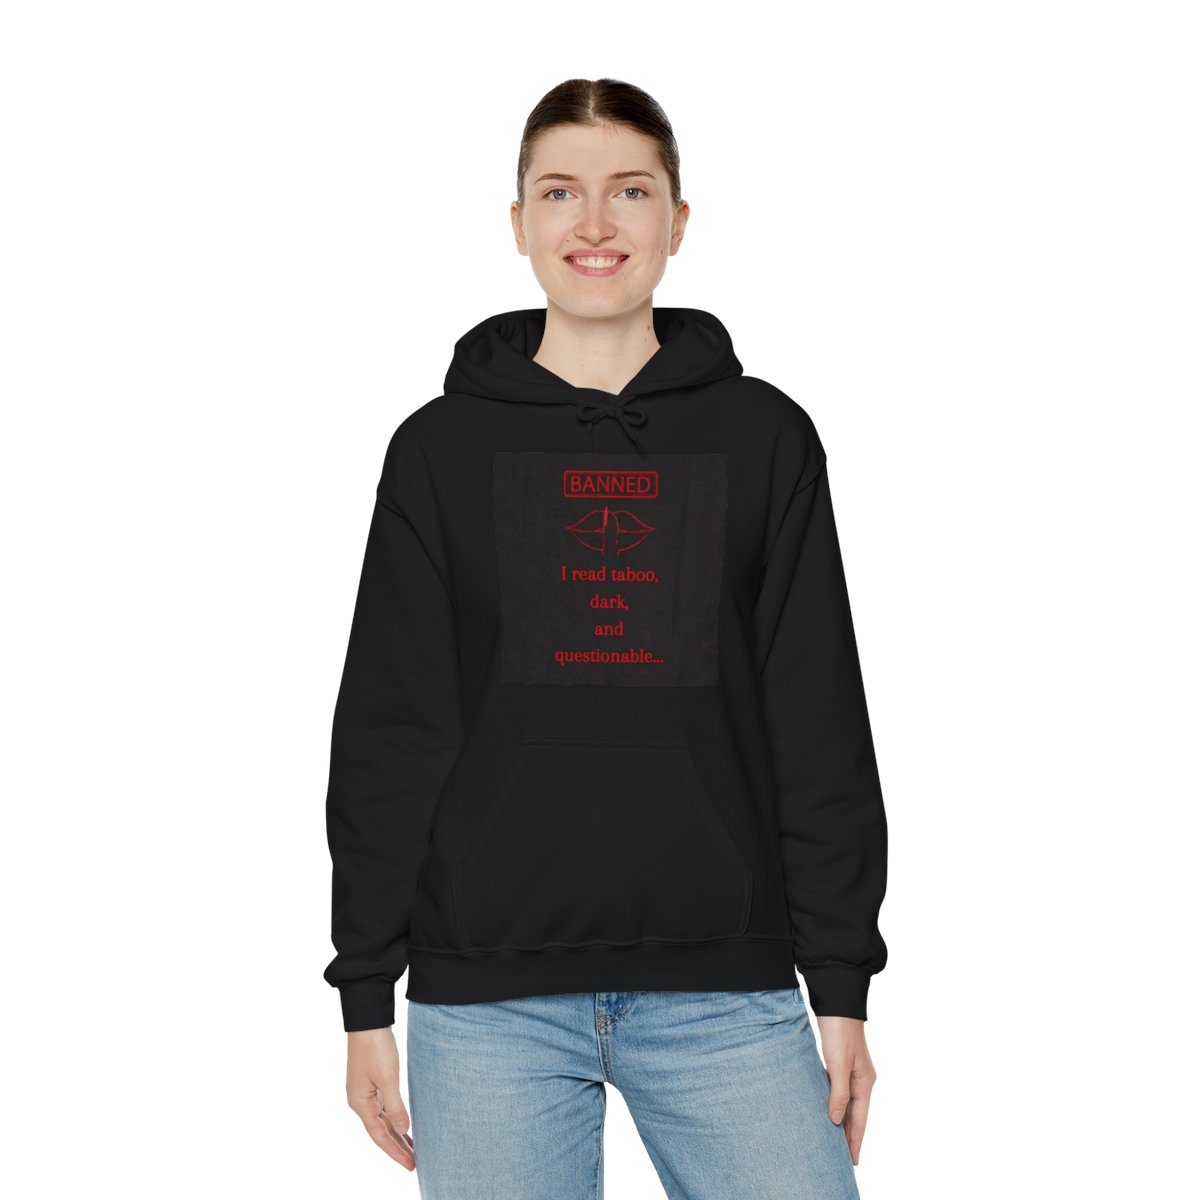 Read More Bitch less, Banned Books Unisex Heavy Blend™ Hooded Sweatshirt product thumbnail image